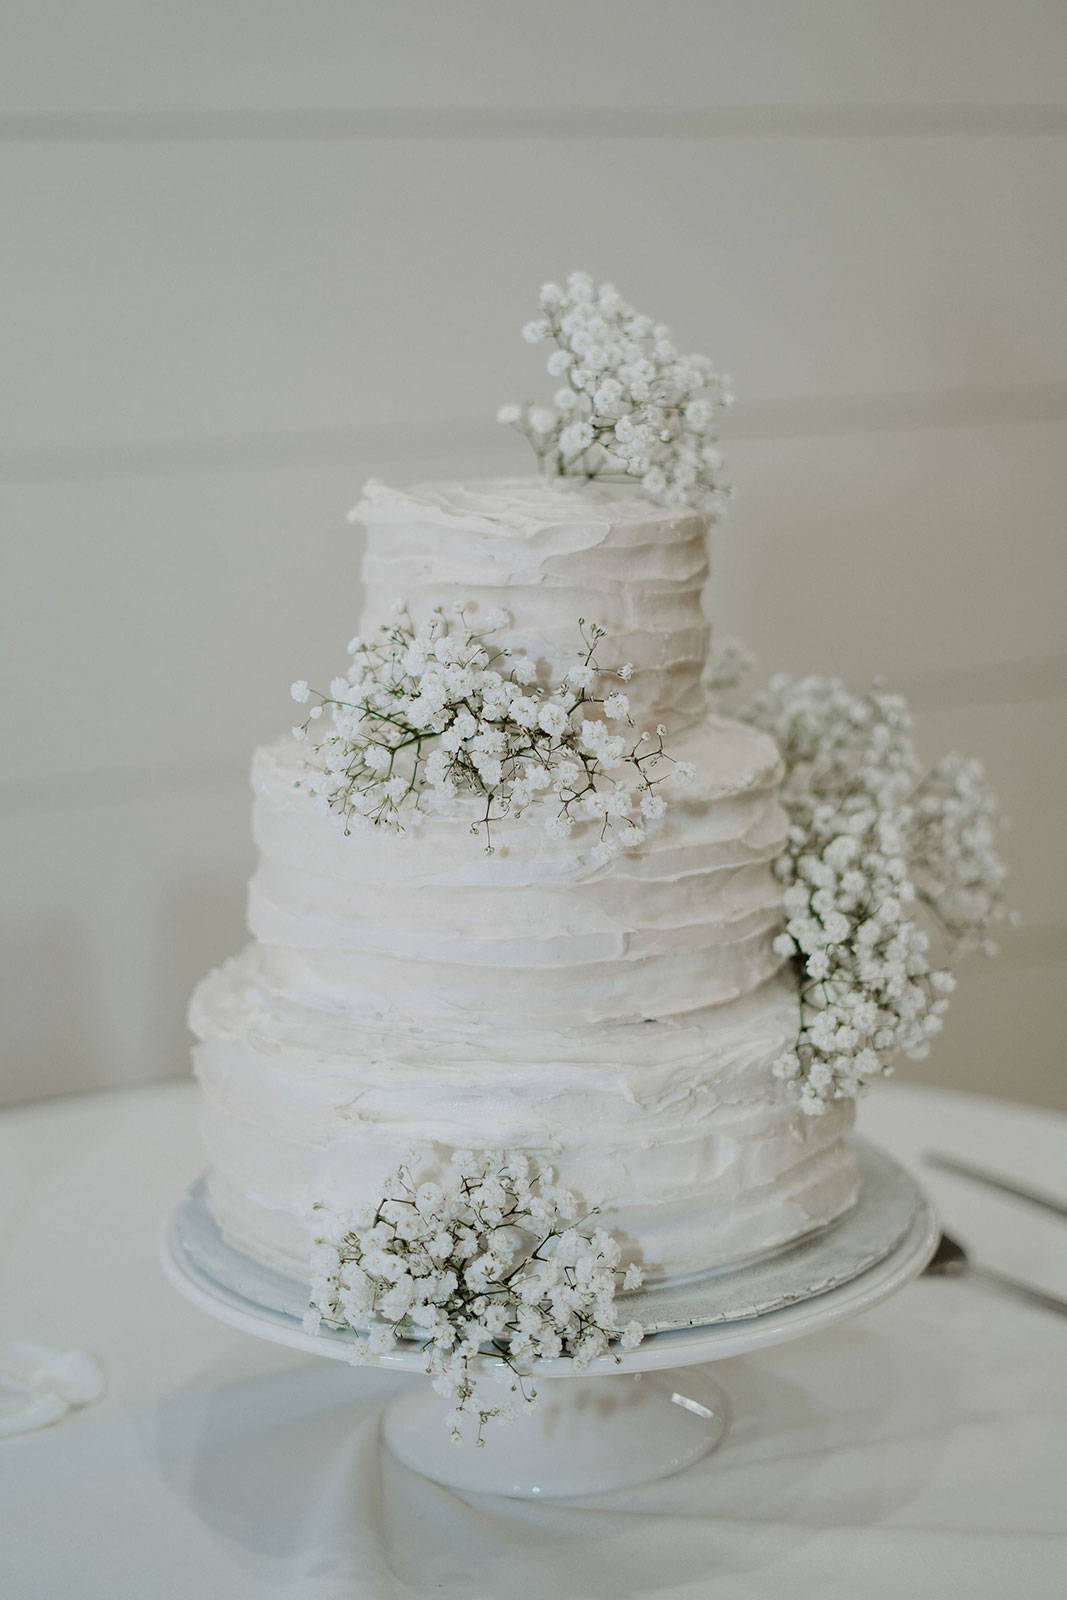 White tiered wedding cake with babies breath flowers